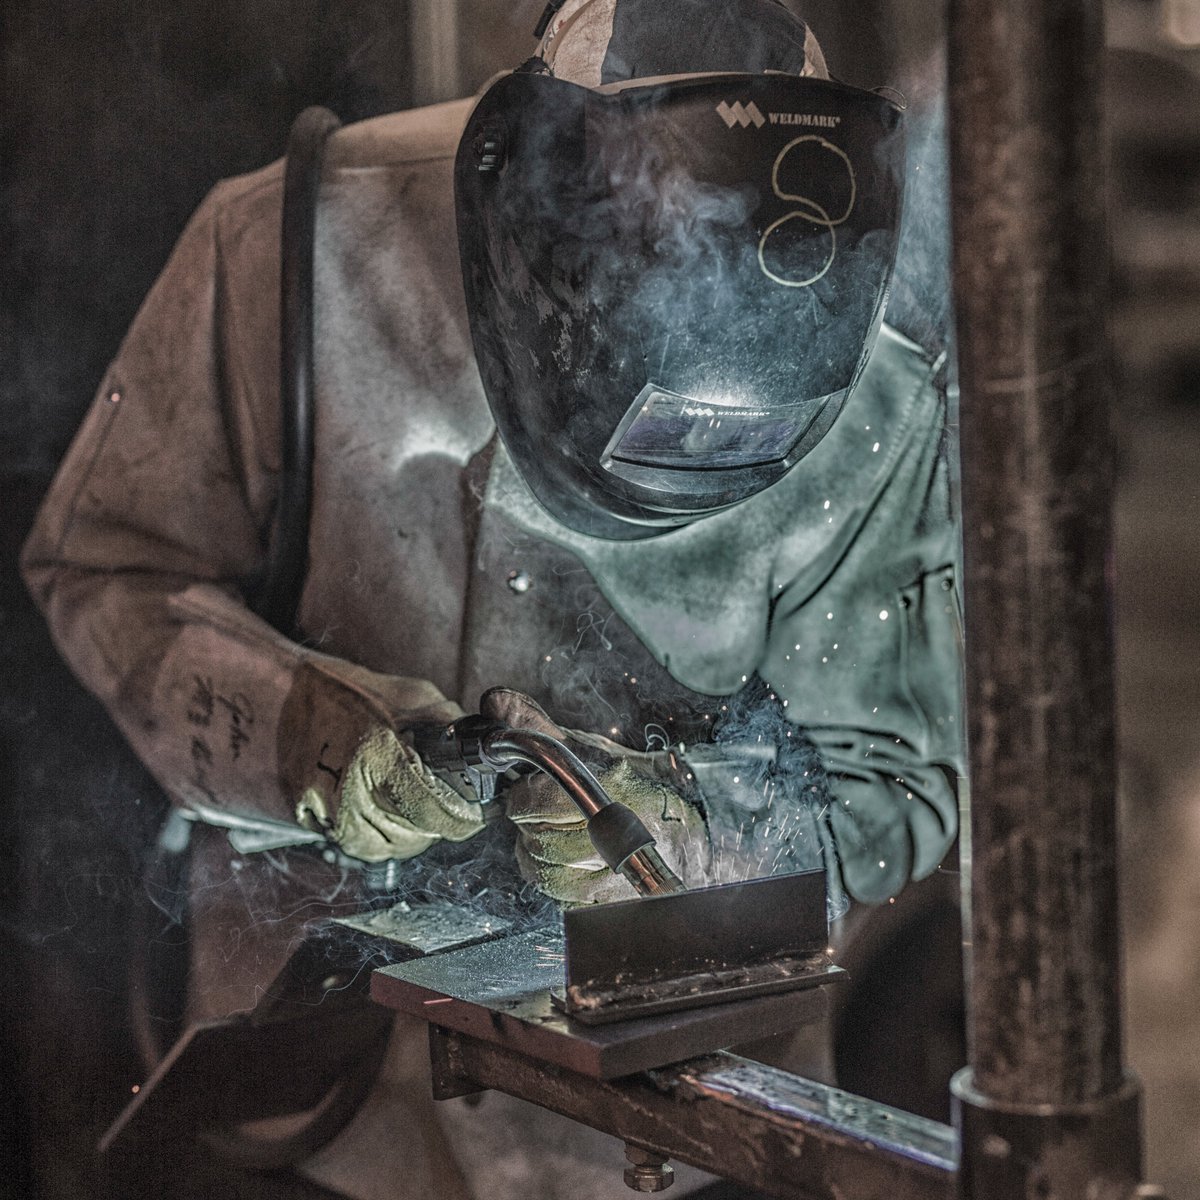 Since tradespeople are the backbone of Canada, we think National Skilled Trades Day should be every day.
#nationalskilledtradesday #nationaltradesday #welding #welder #welders #fabrication #weld #weldernation #metalwork #weldlife #metalworking #welders #tradespeople #construction